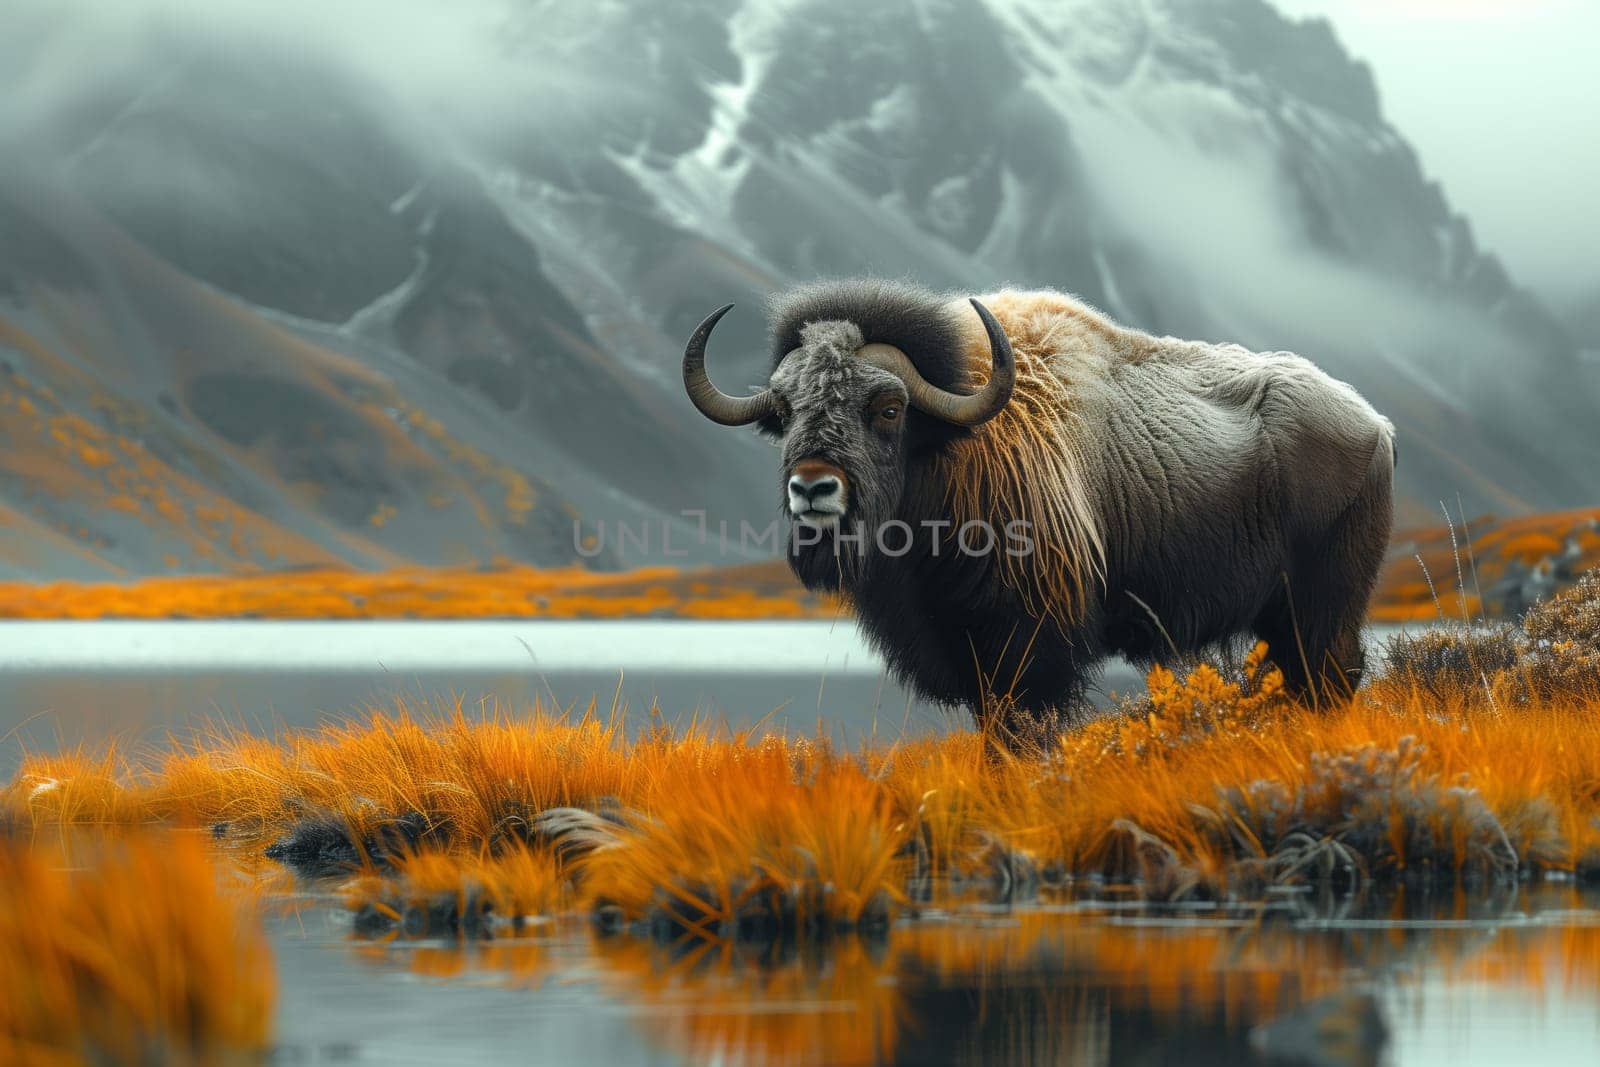 A muskox bull is standing in the water of a highland lake, surrounded by a natural landscape and mountainous ecoregion